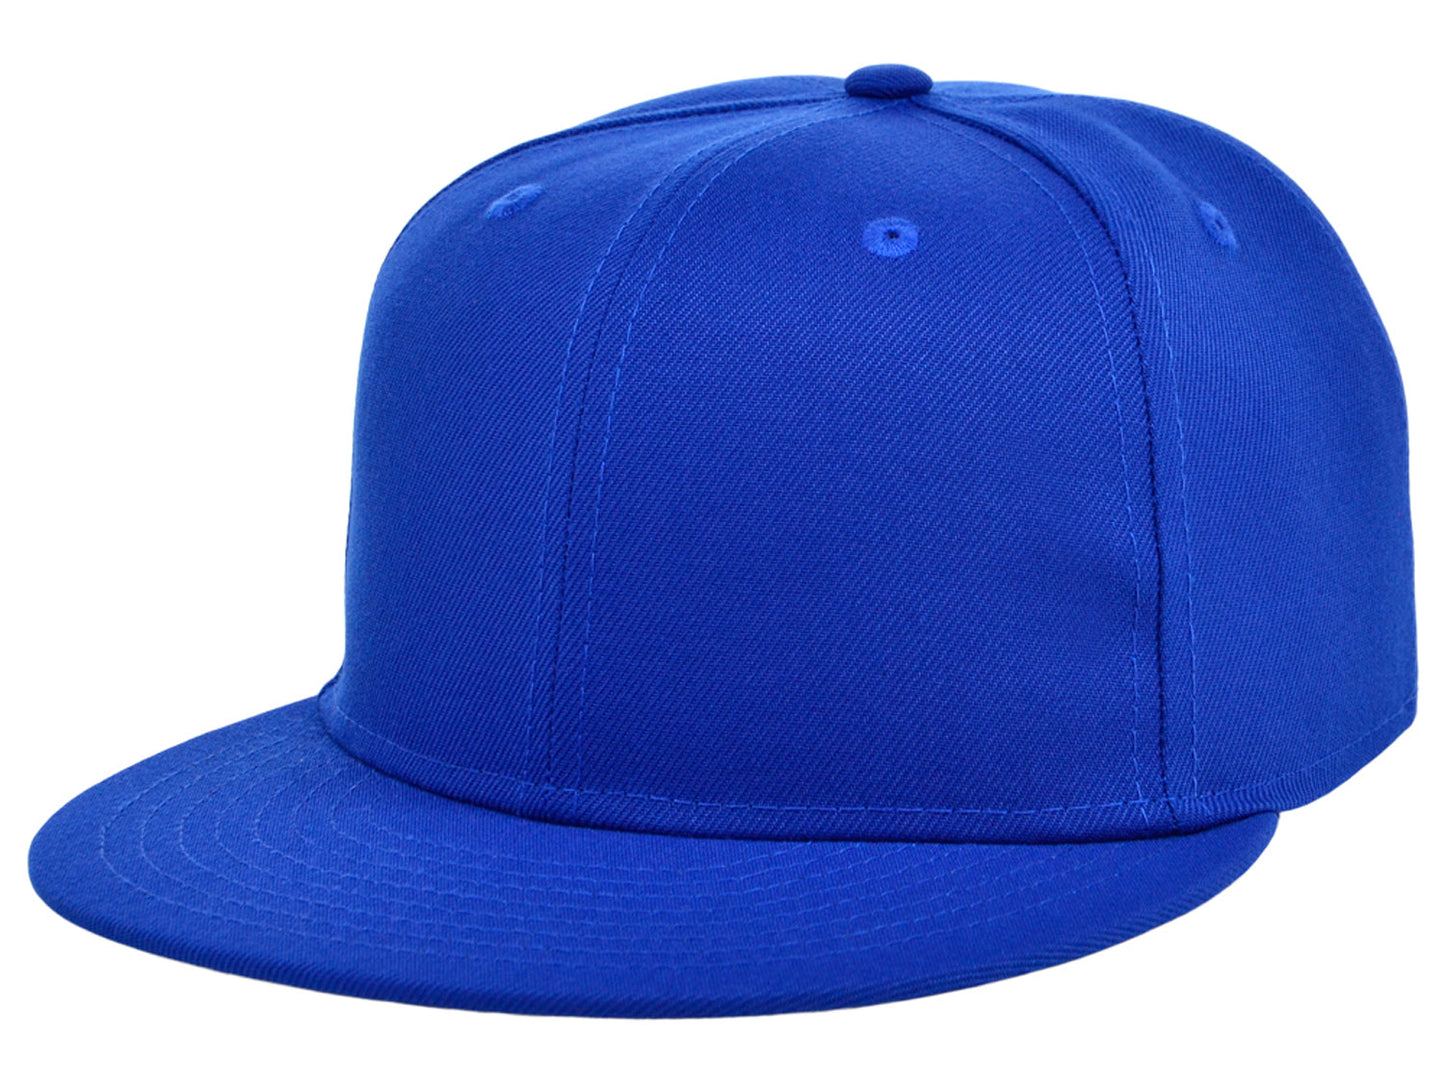 Crowns by Lids Full Court Fitted Cap - Royal Blue